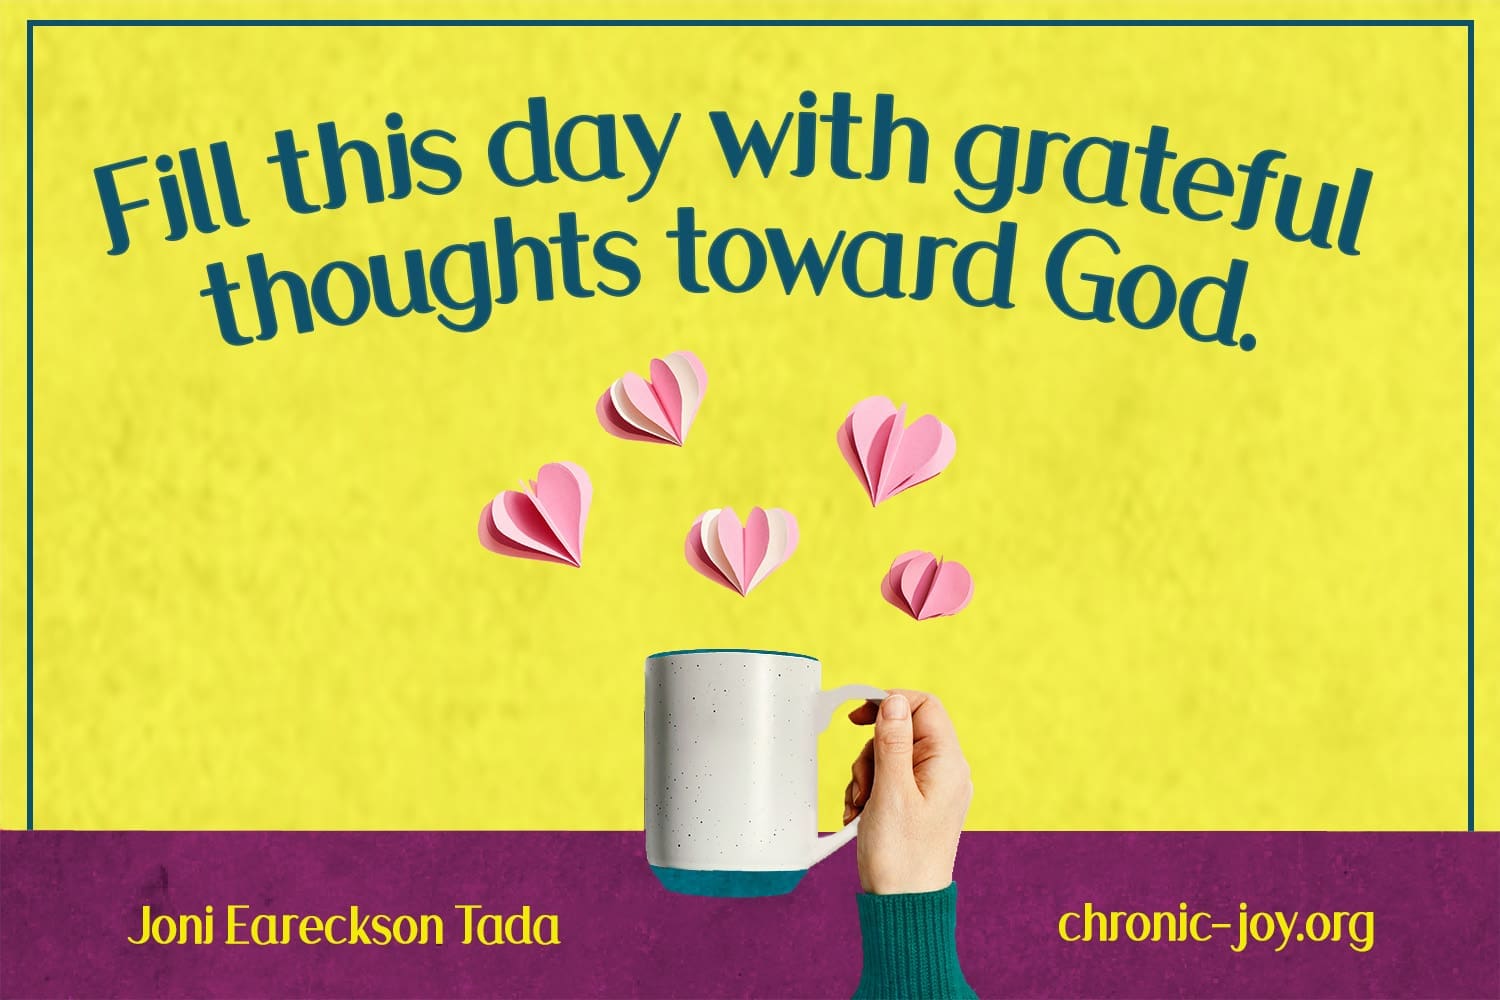 Fill this day with grateful thoughts toward God.